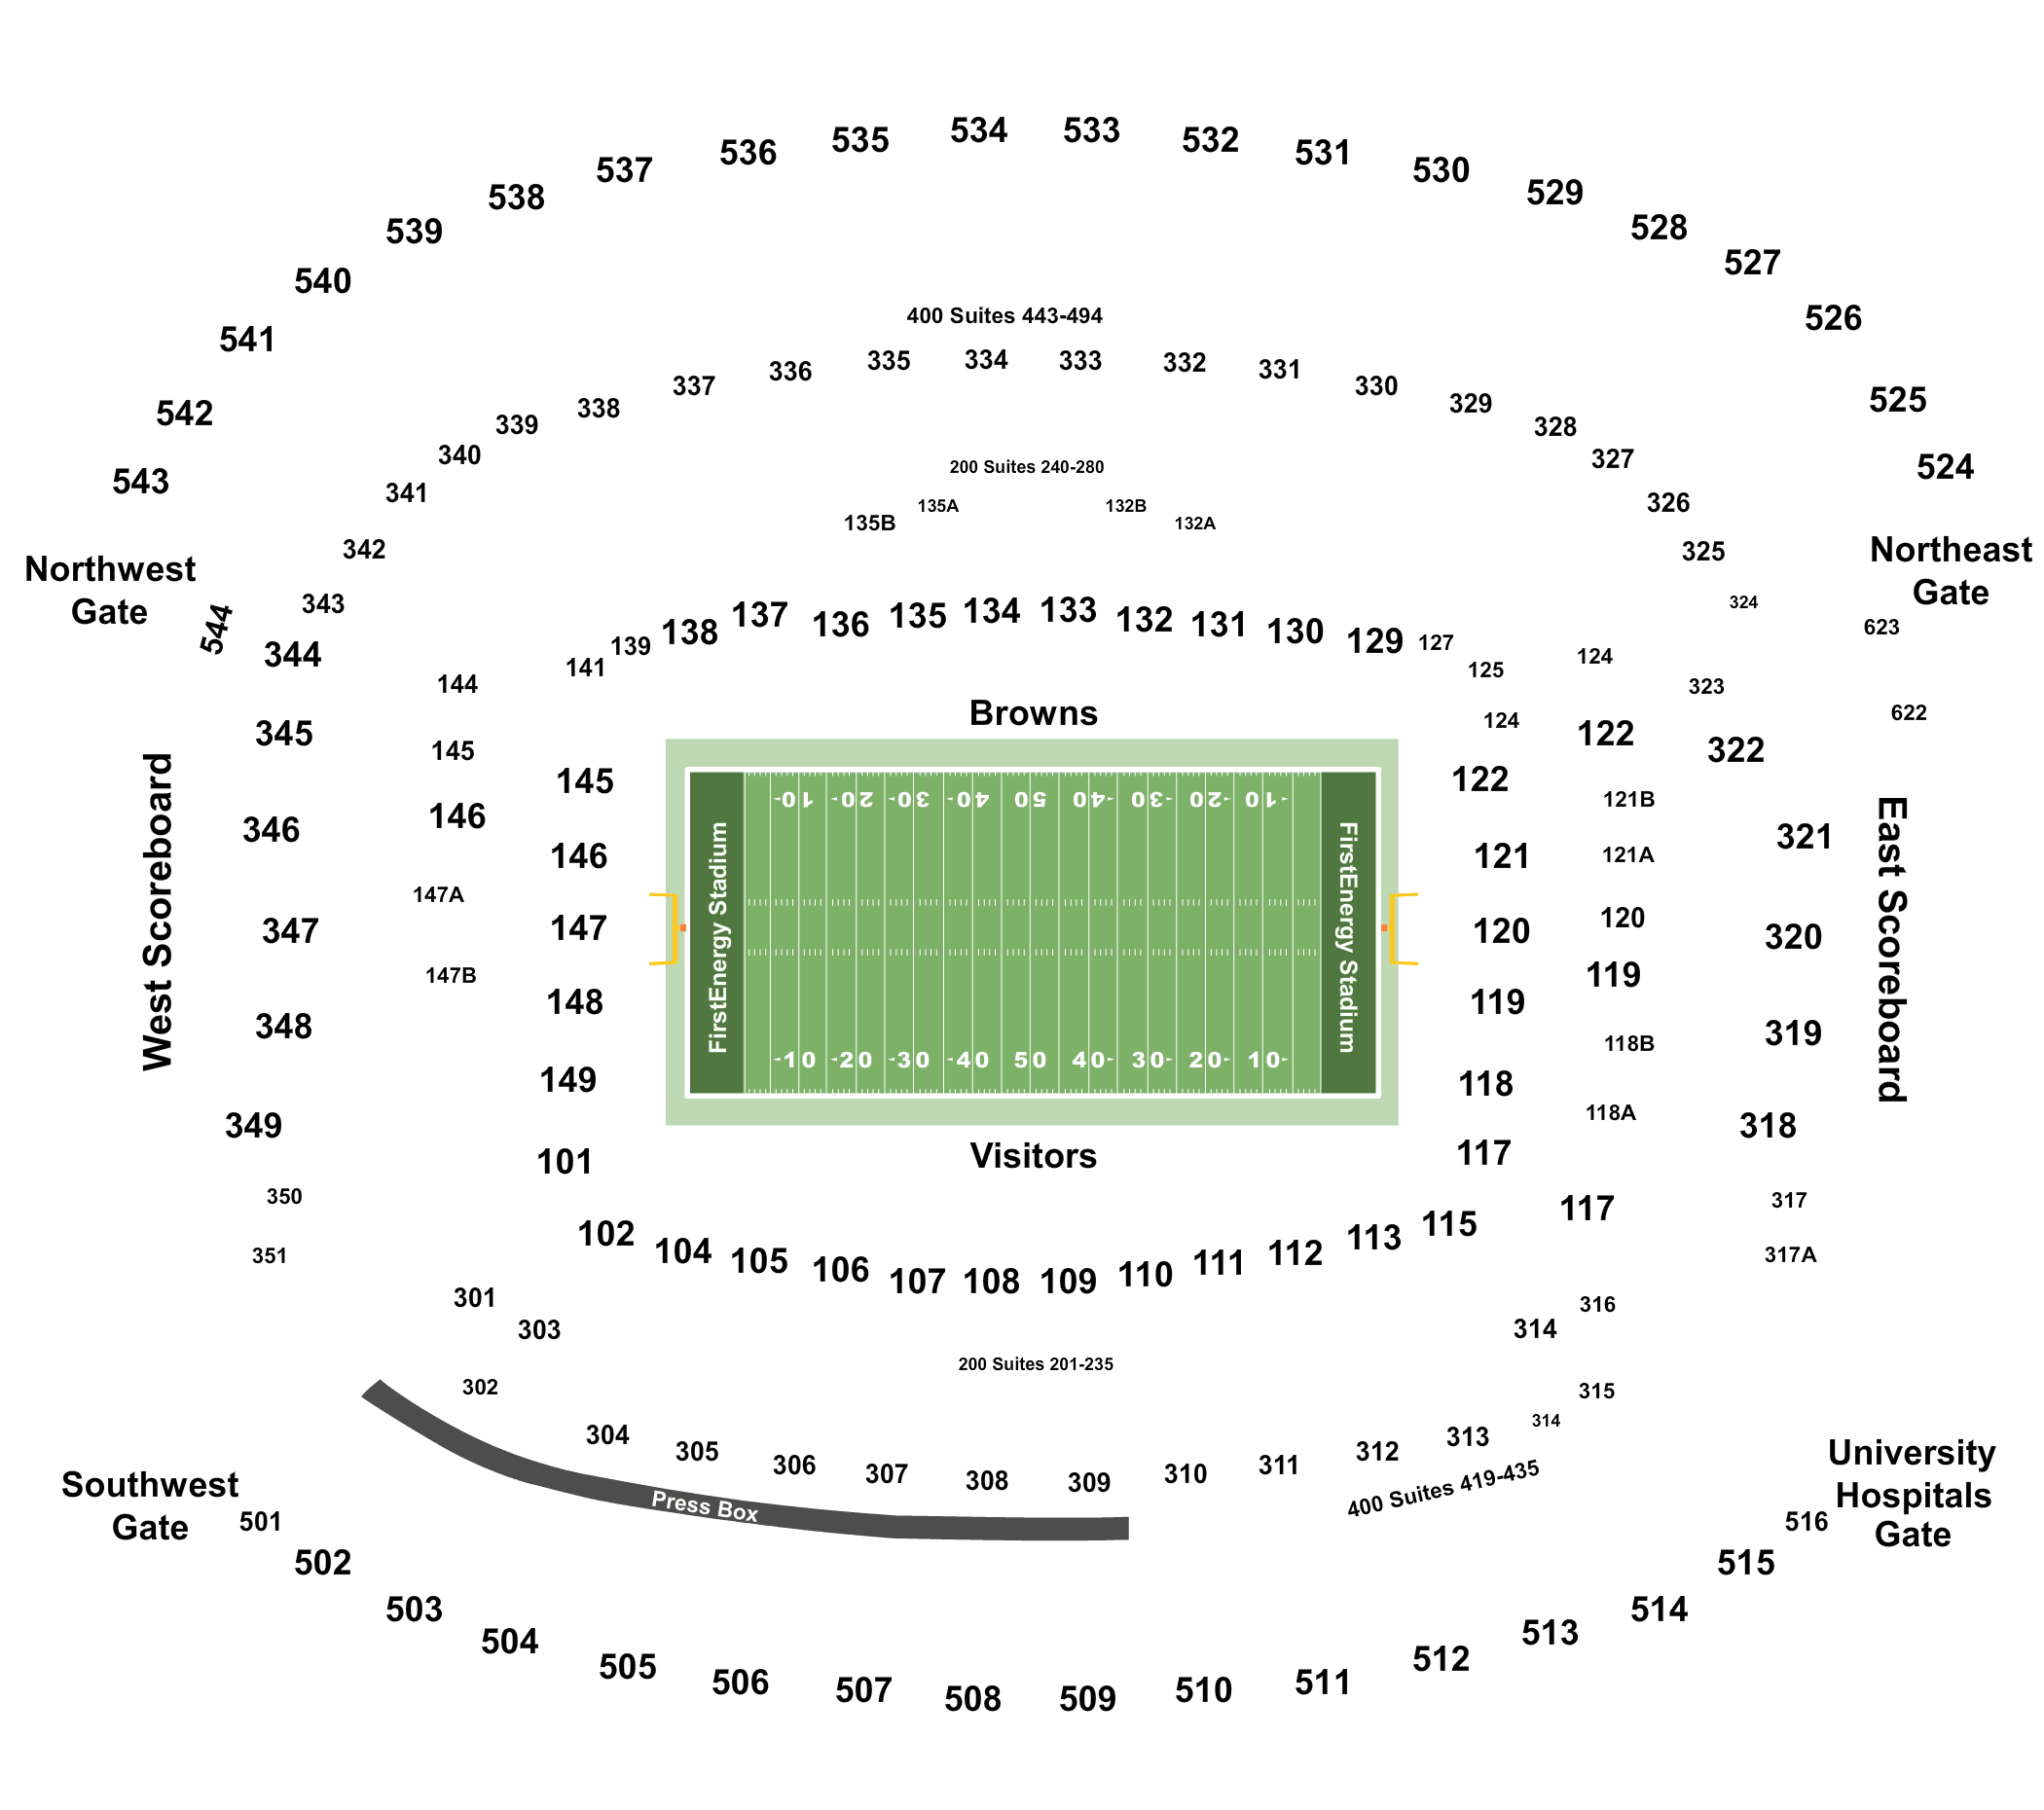 steelers seats for sale